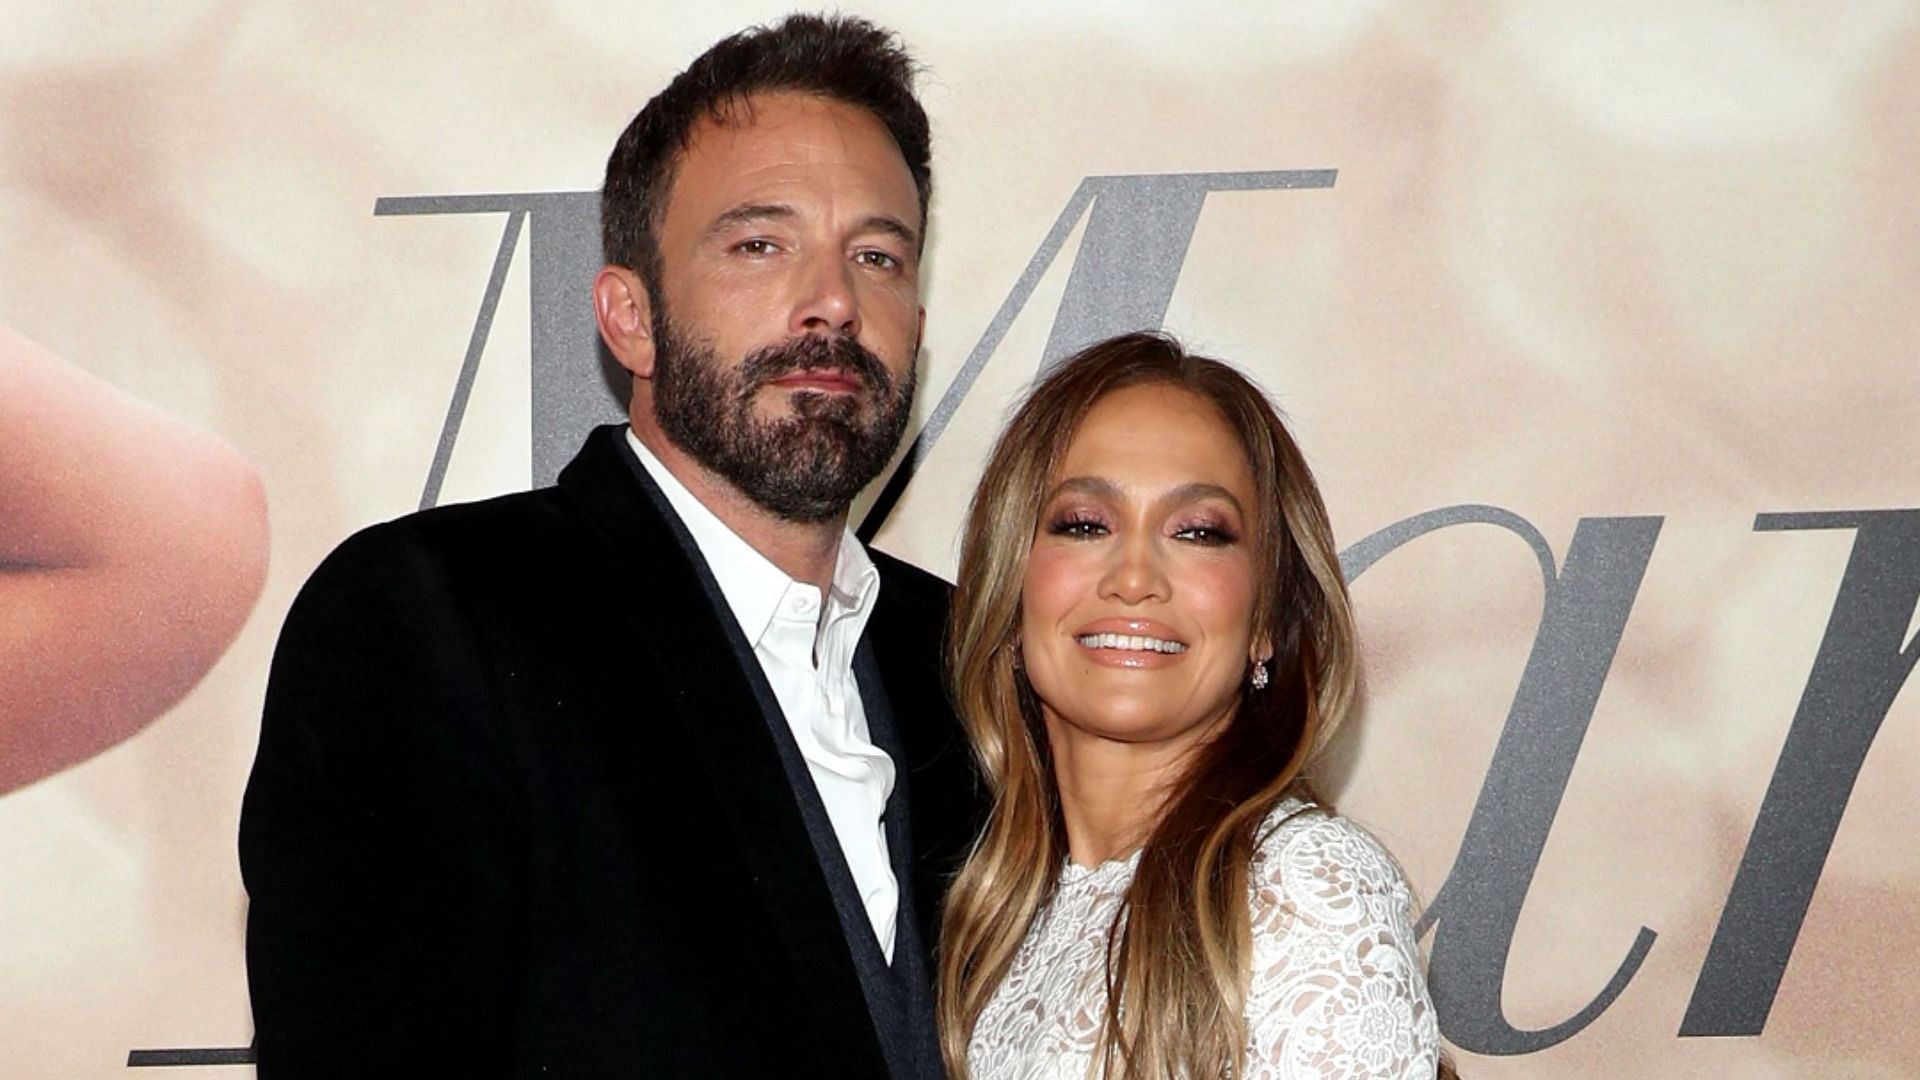 Lopez and Affleck called their engagement off in 2004 (Image via John Salangsang/Shutterstock)